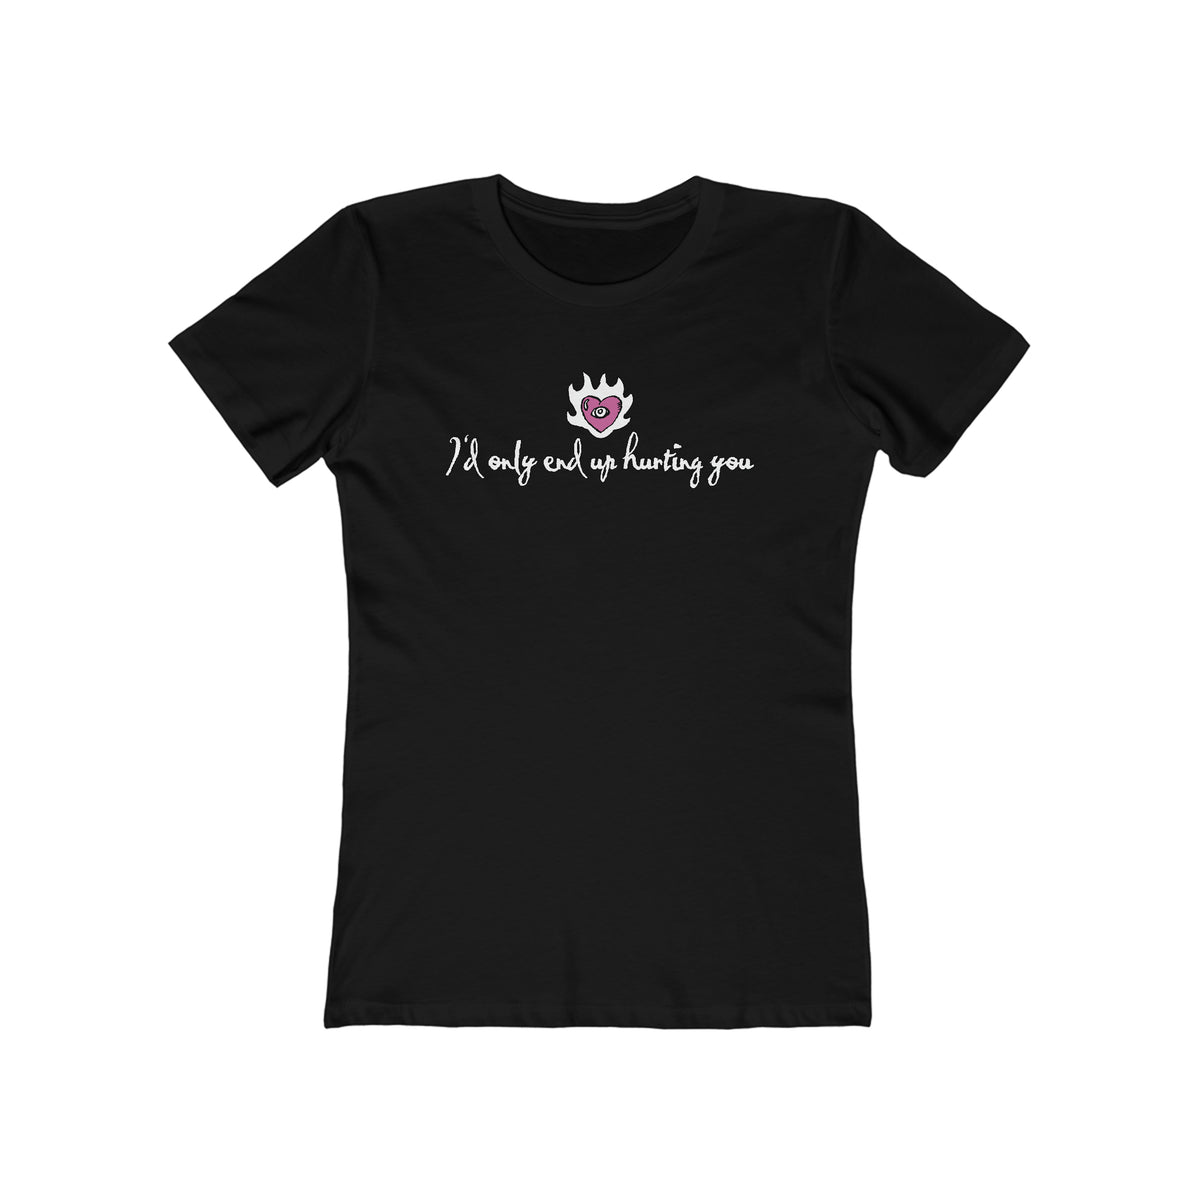 I'D Only End Up Hurting You  - Women’s T-Shirt